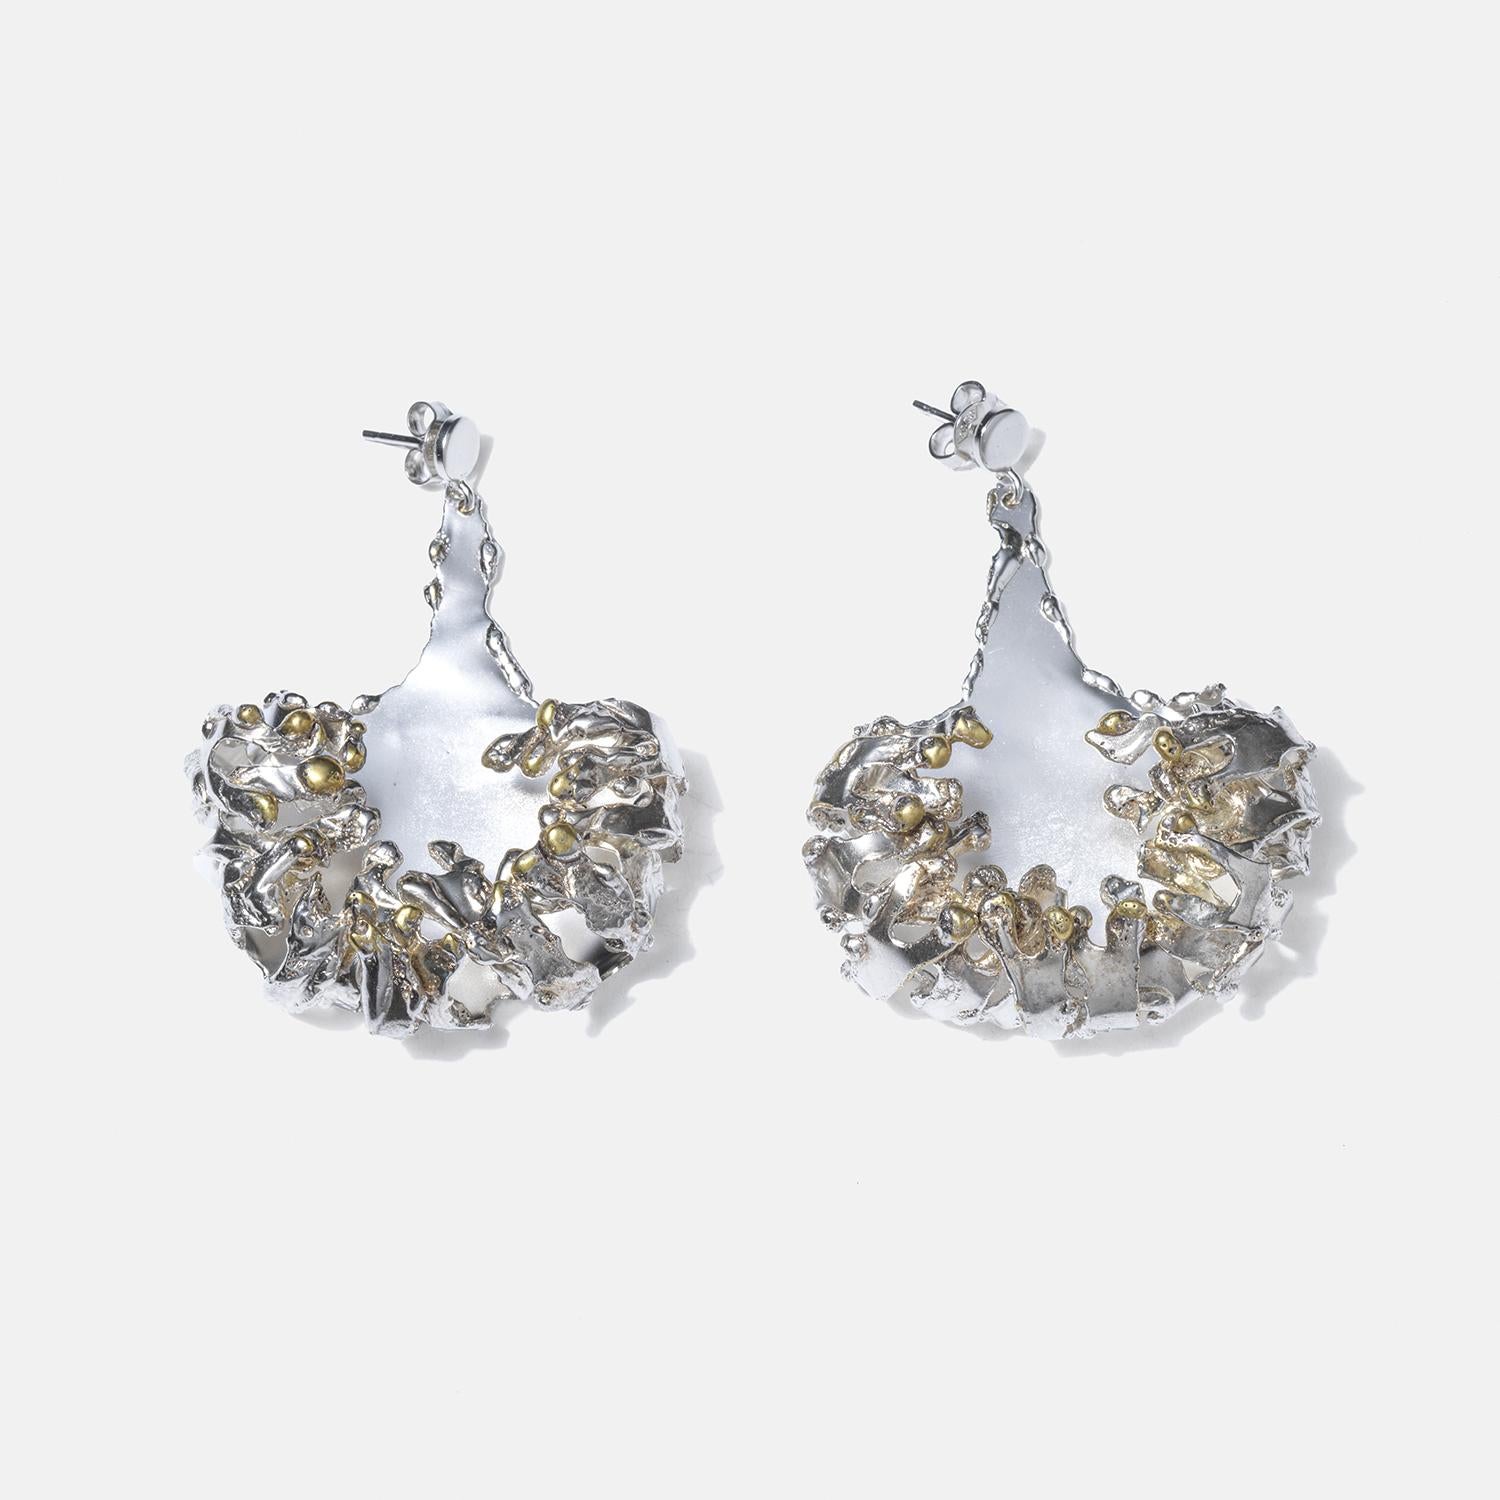 These striking silver dangling earrings feature an organic, molten-like shape, with fluid contours and a textured surface. The earrings are highlighted by gilded silver accents, which add a touch of contrasting warmth to the predominantly silver